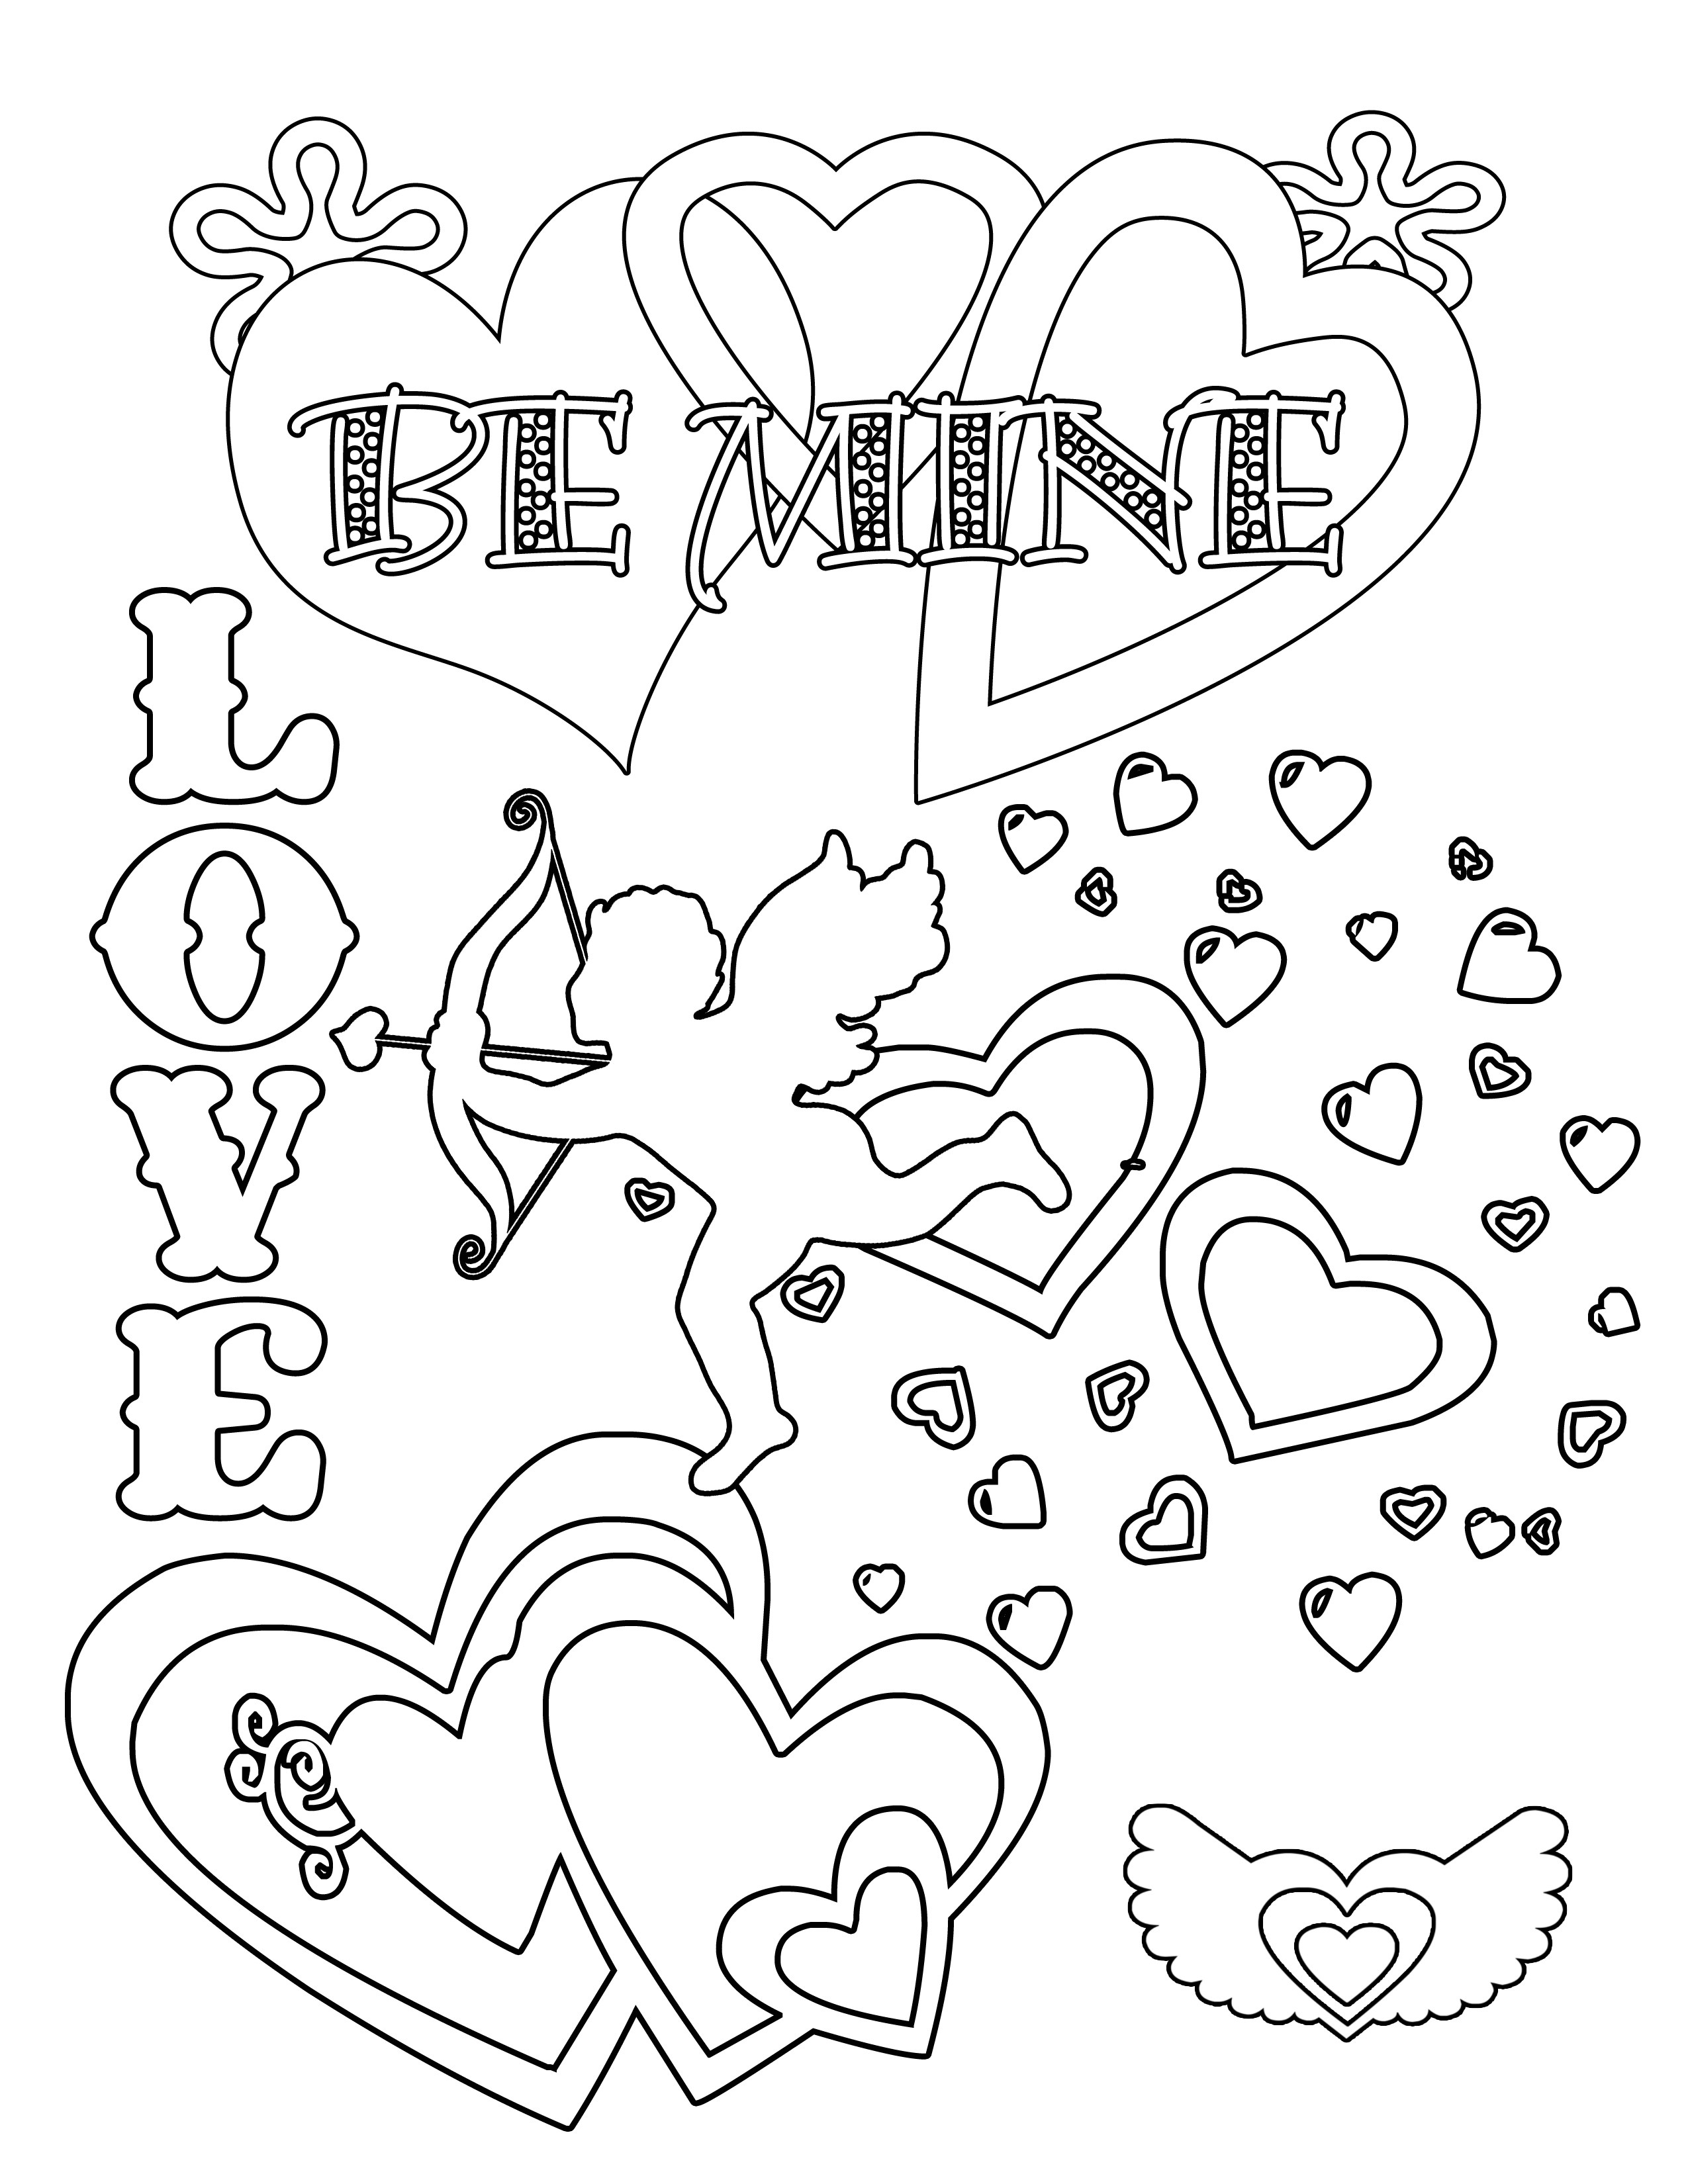 Valentines Day Coloring Page Party Simplicity Free Valentines Day Coloring Pages And Printables